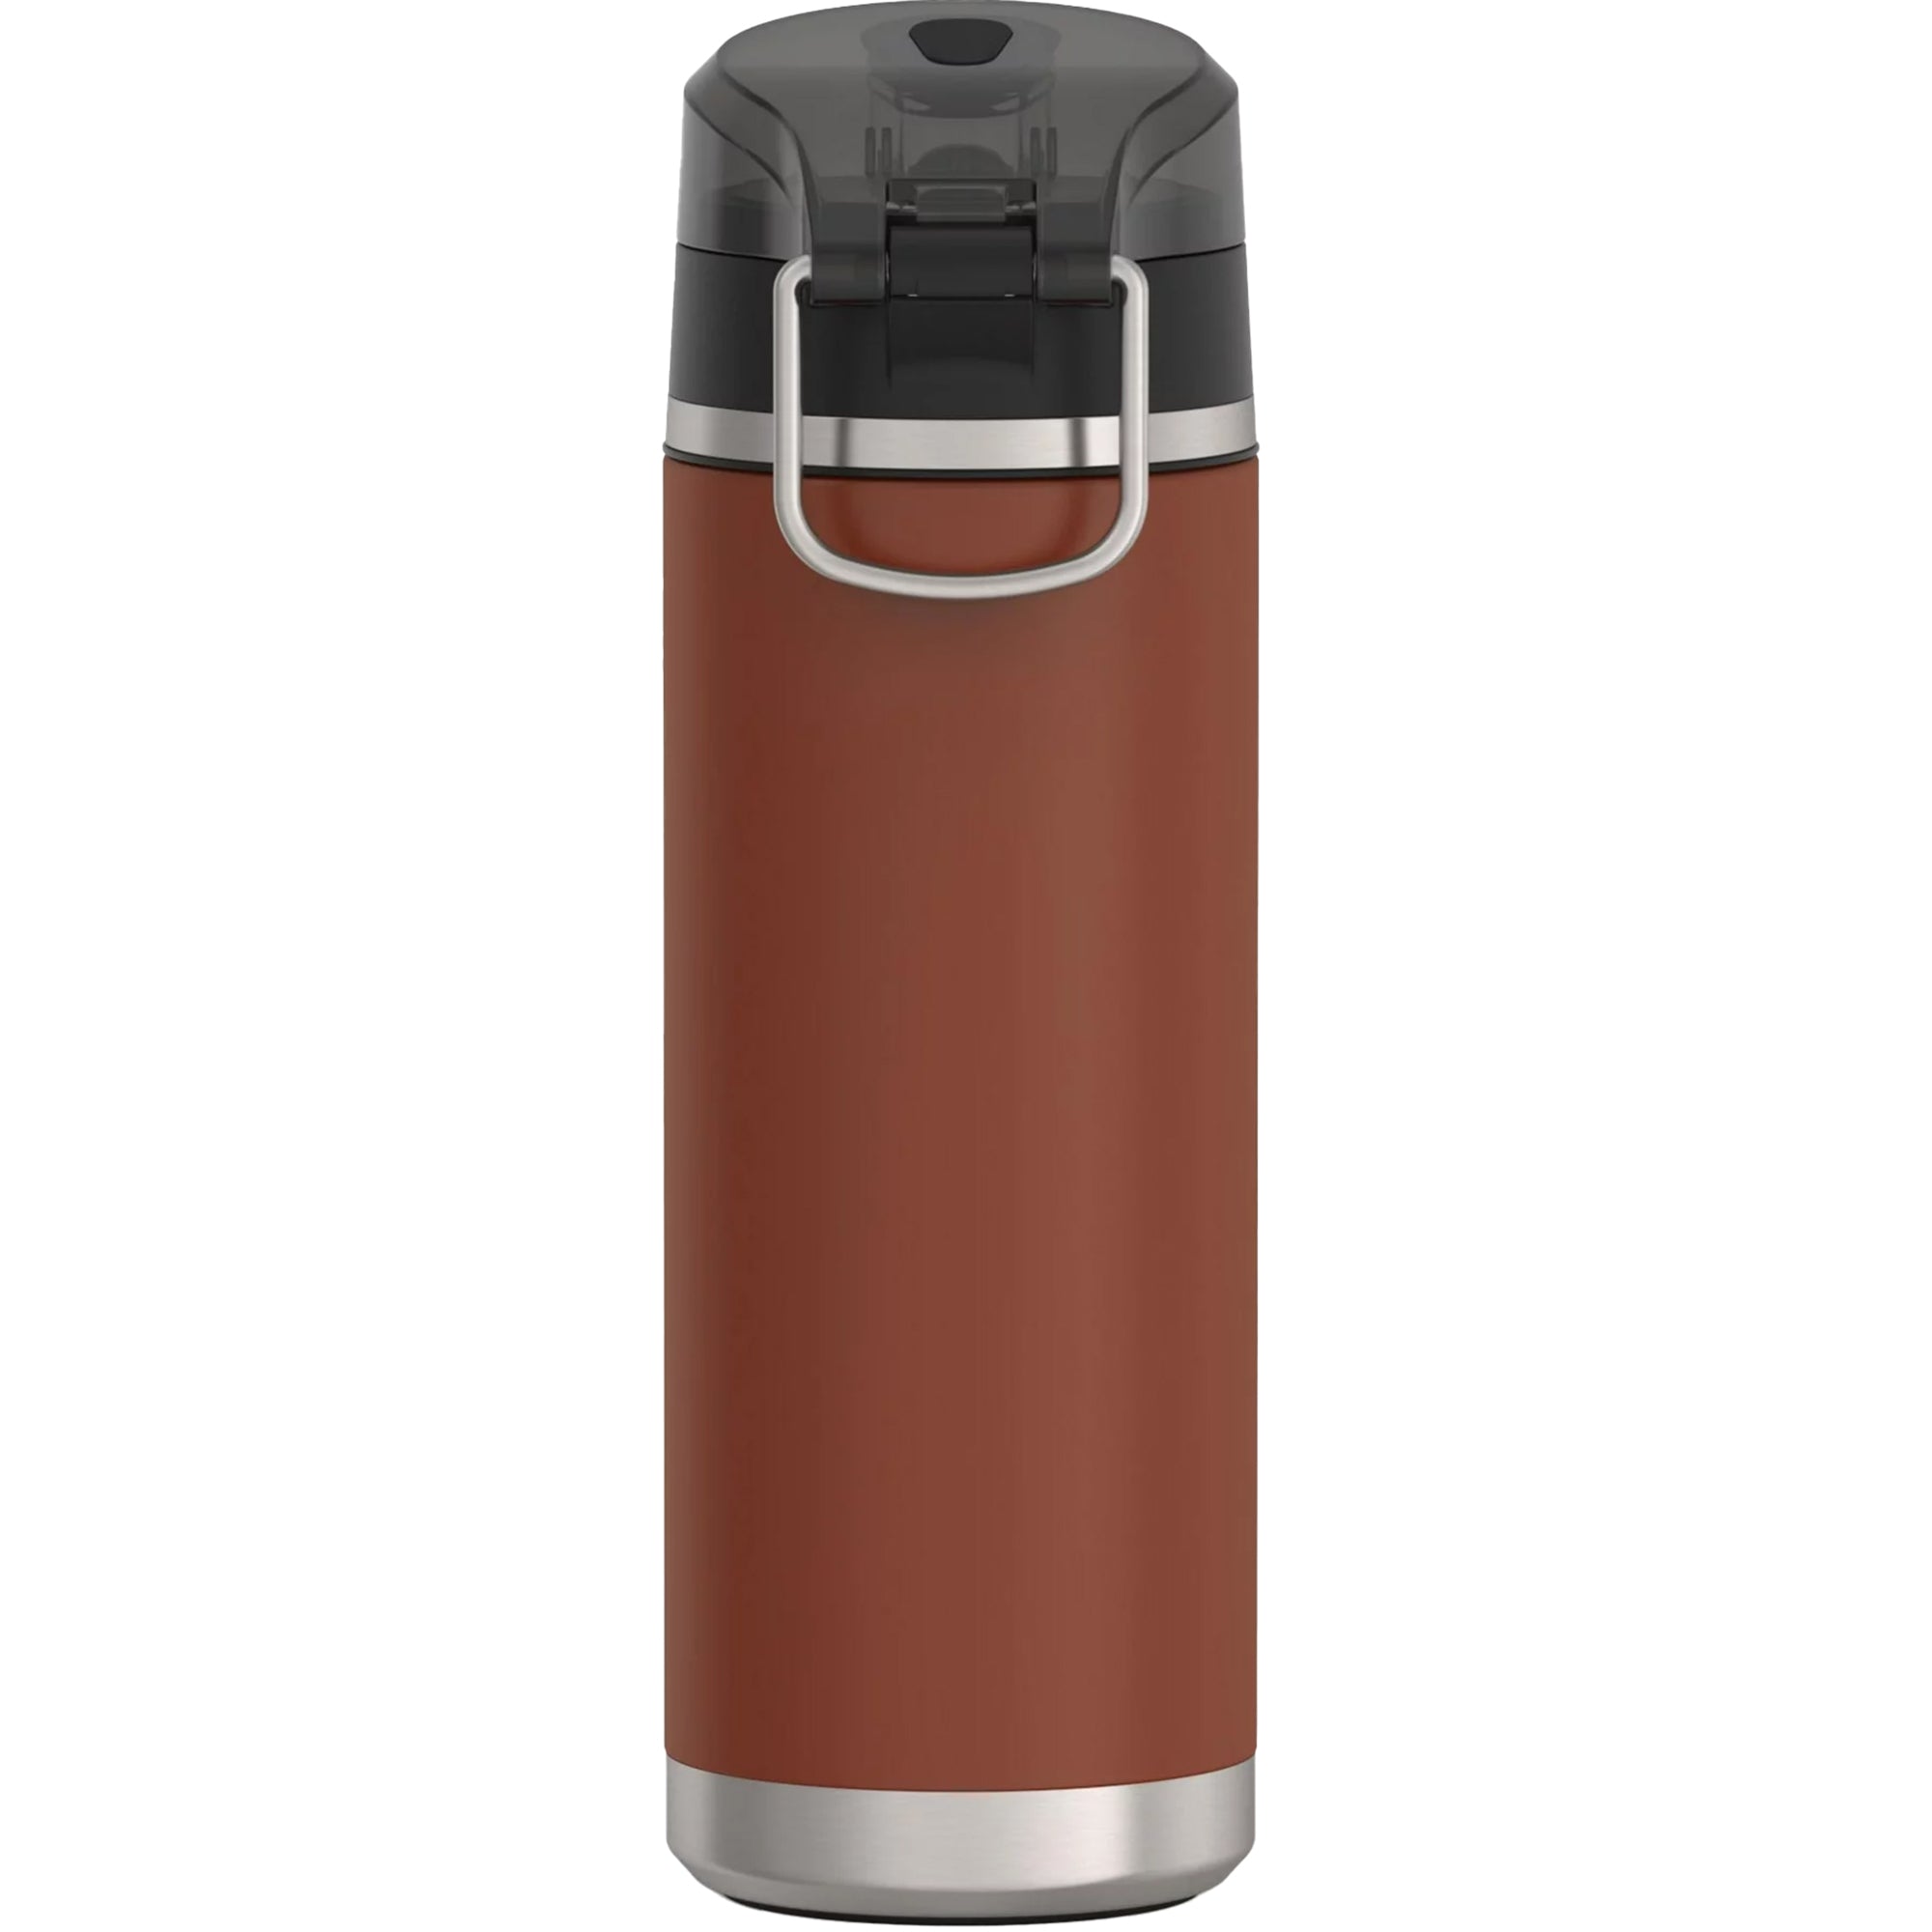 Thermos 24 oz. Icon Vacuum Insulated Stainless Steel Spout Water Bottle Thermos